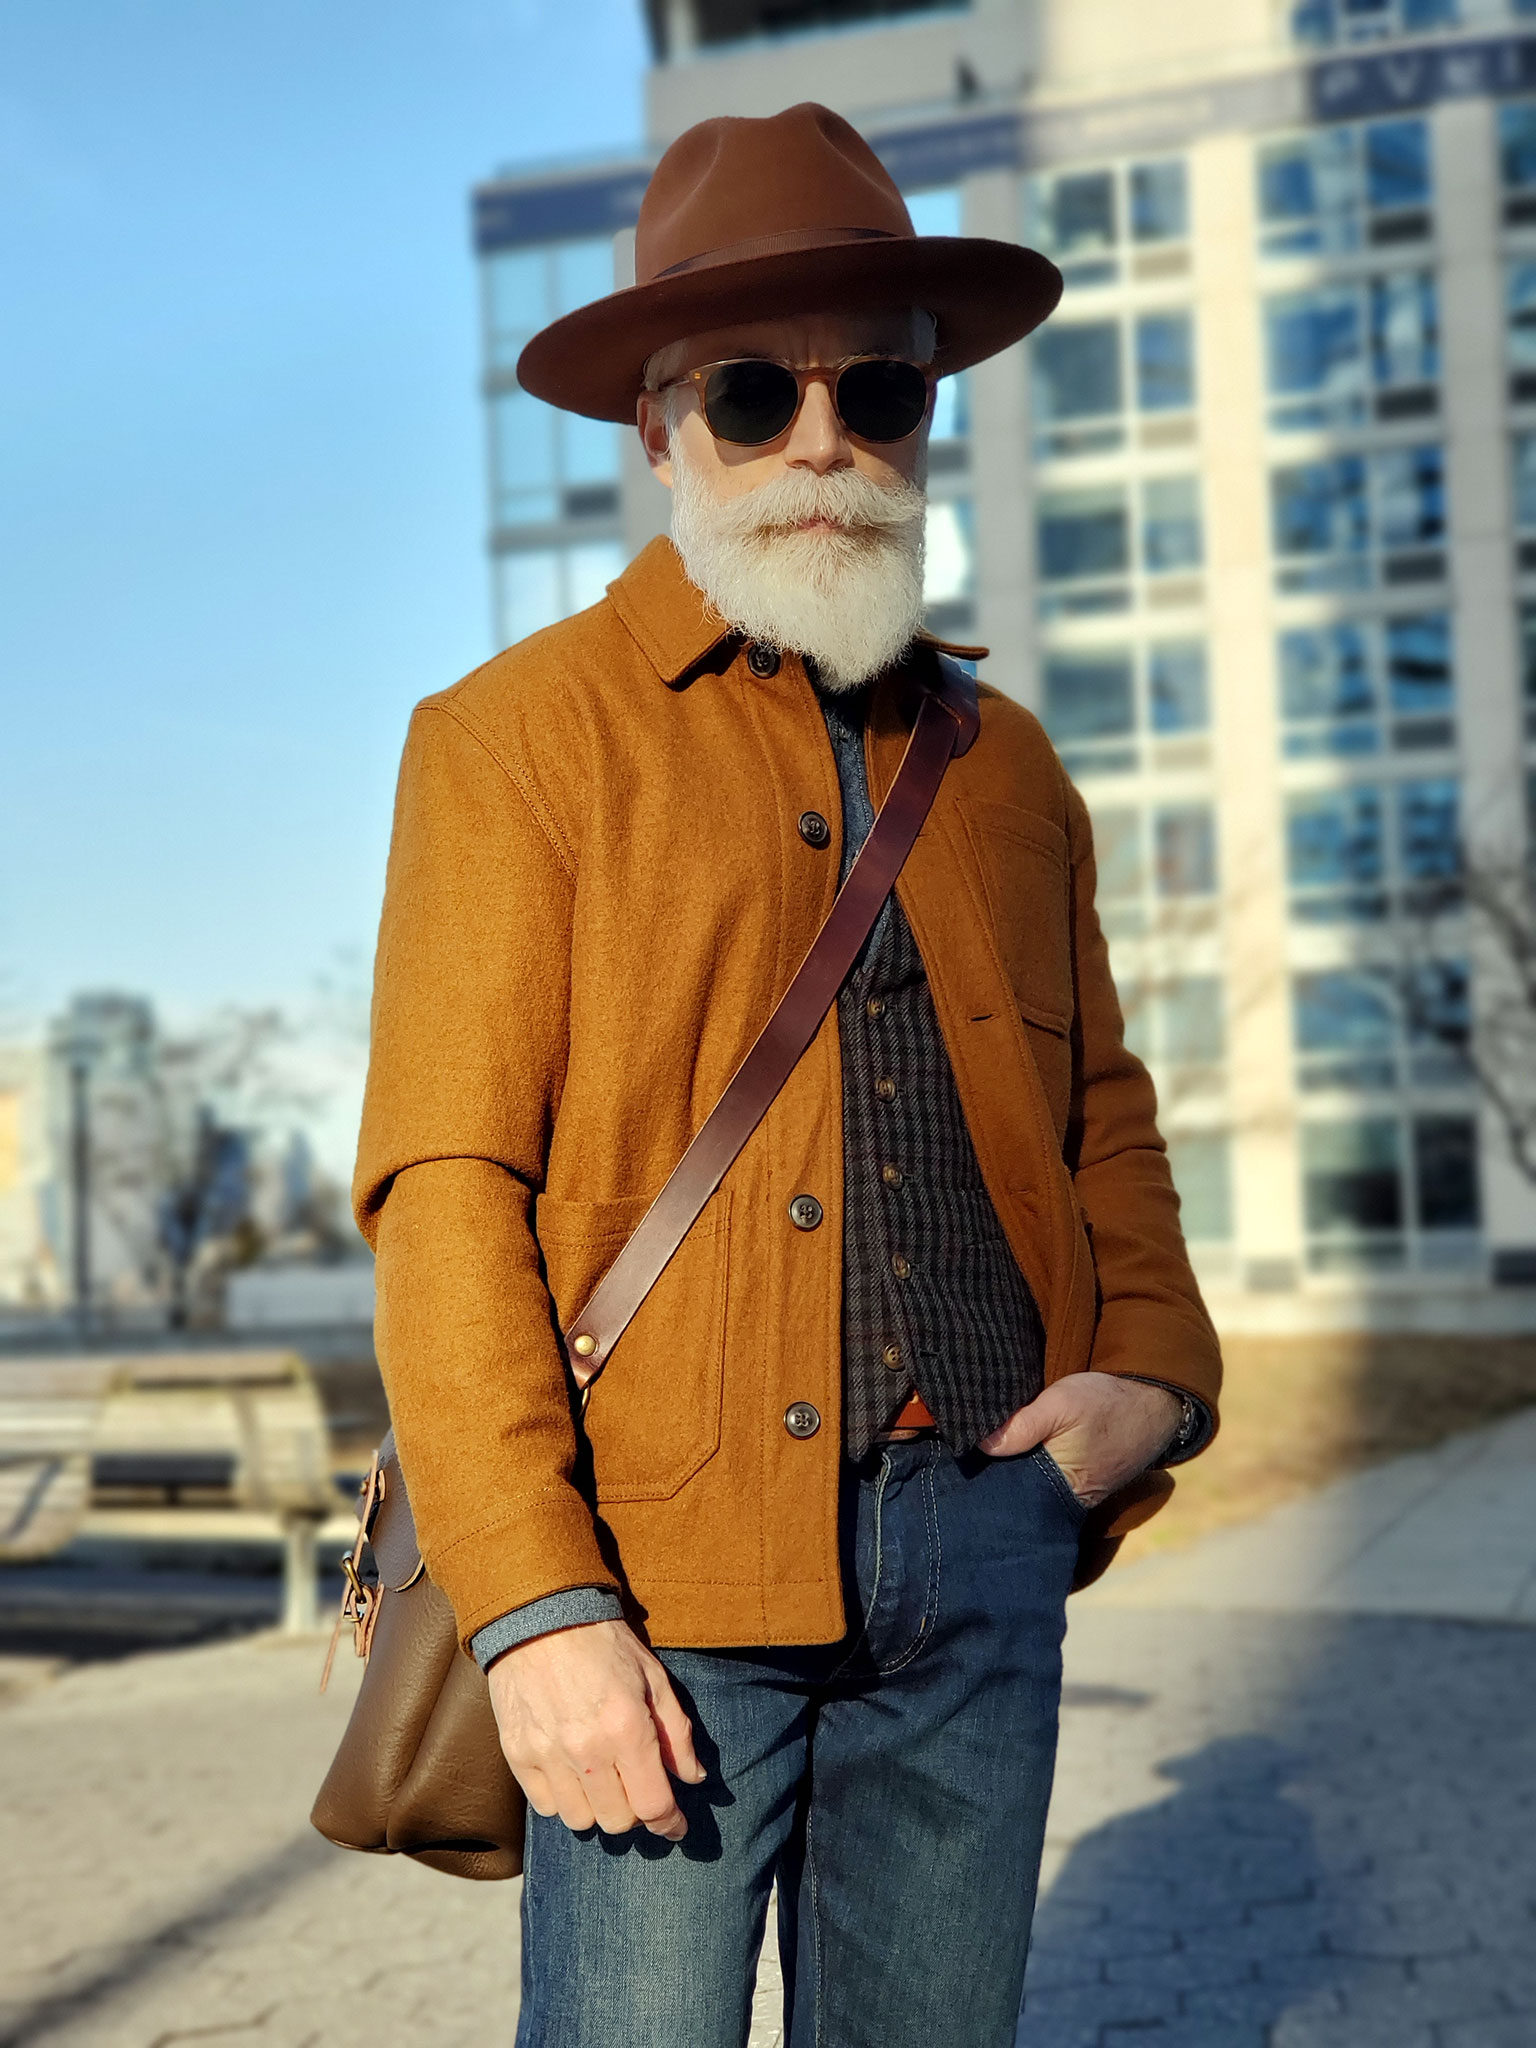 Chore Jacket with Satchel Bag and Fedora - The Modest Man